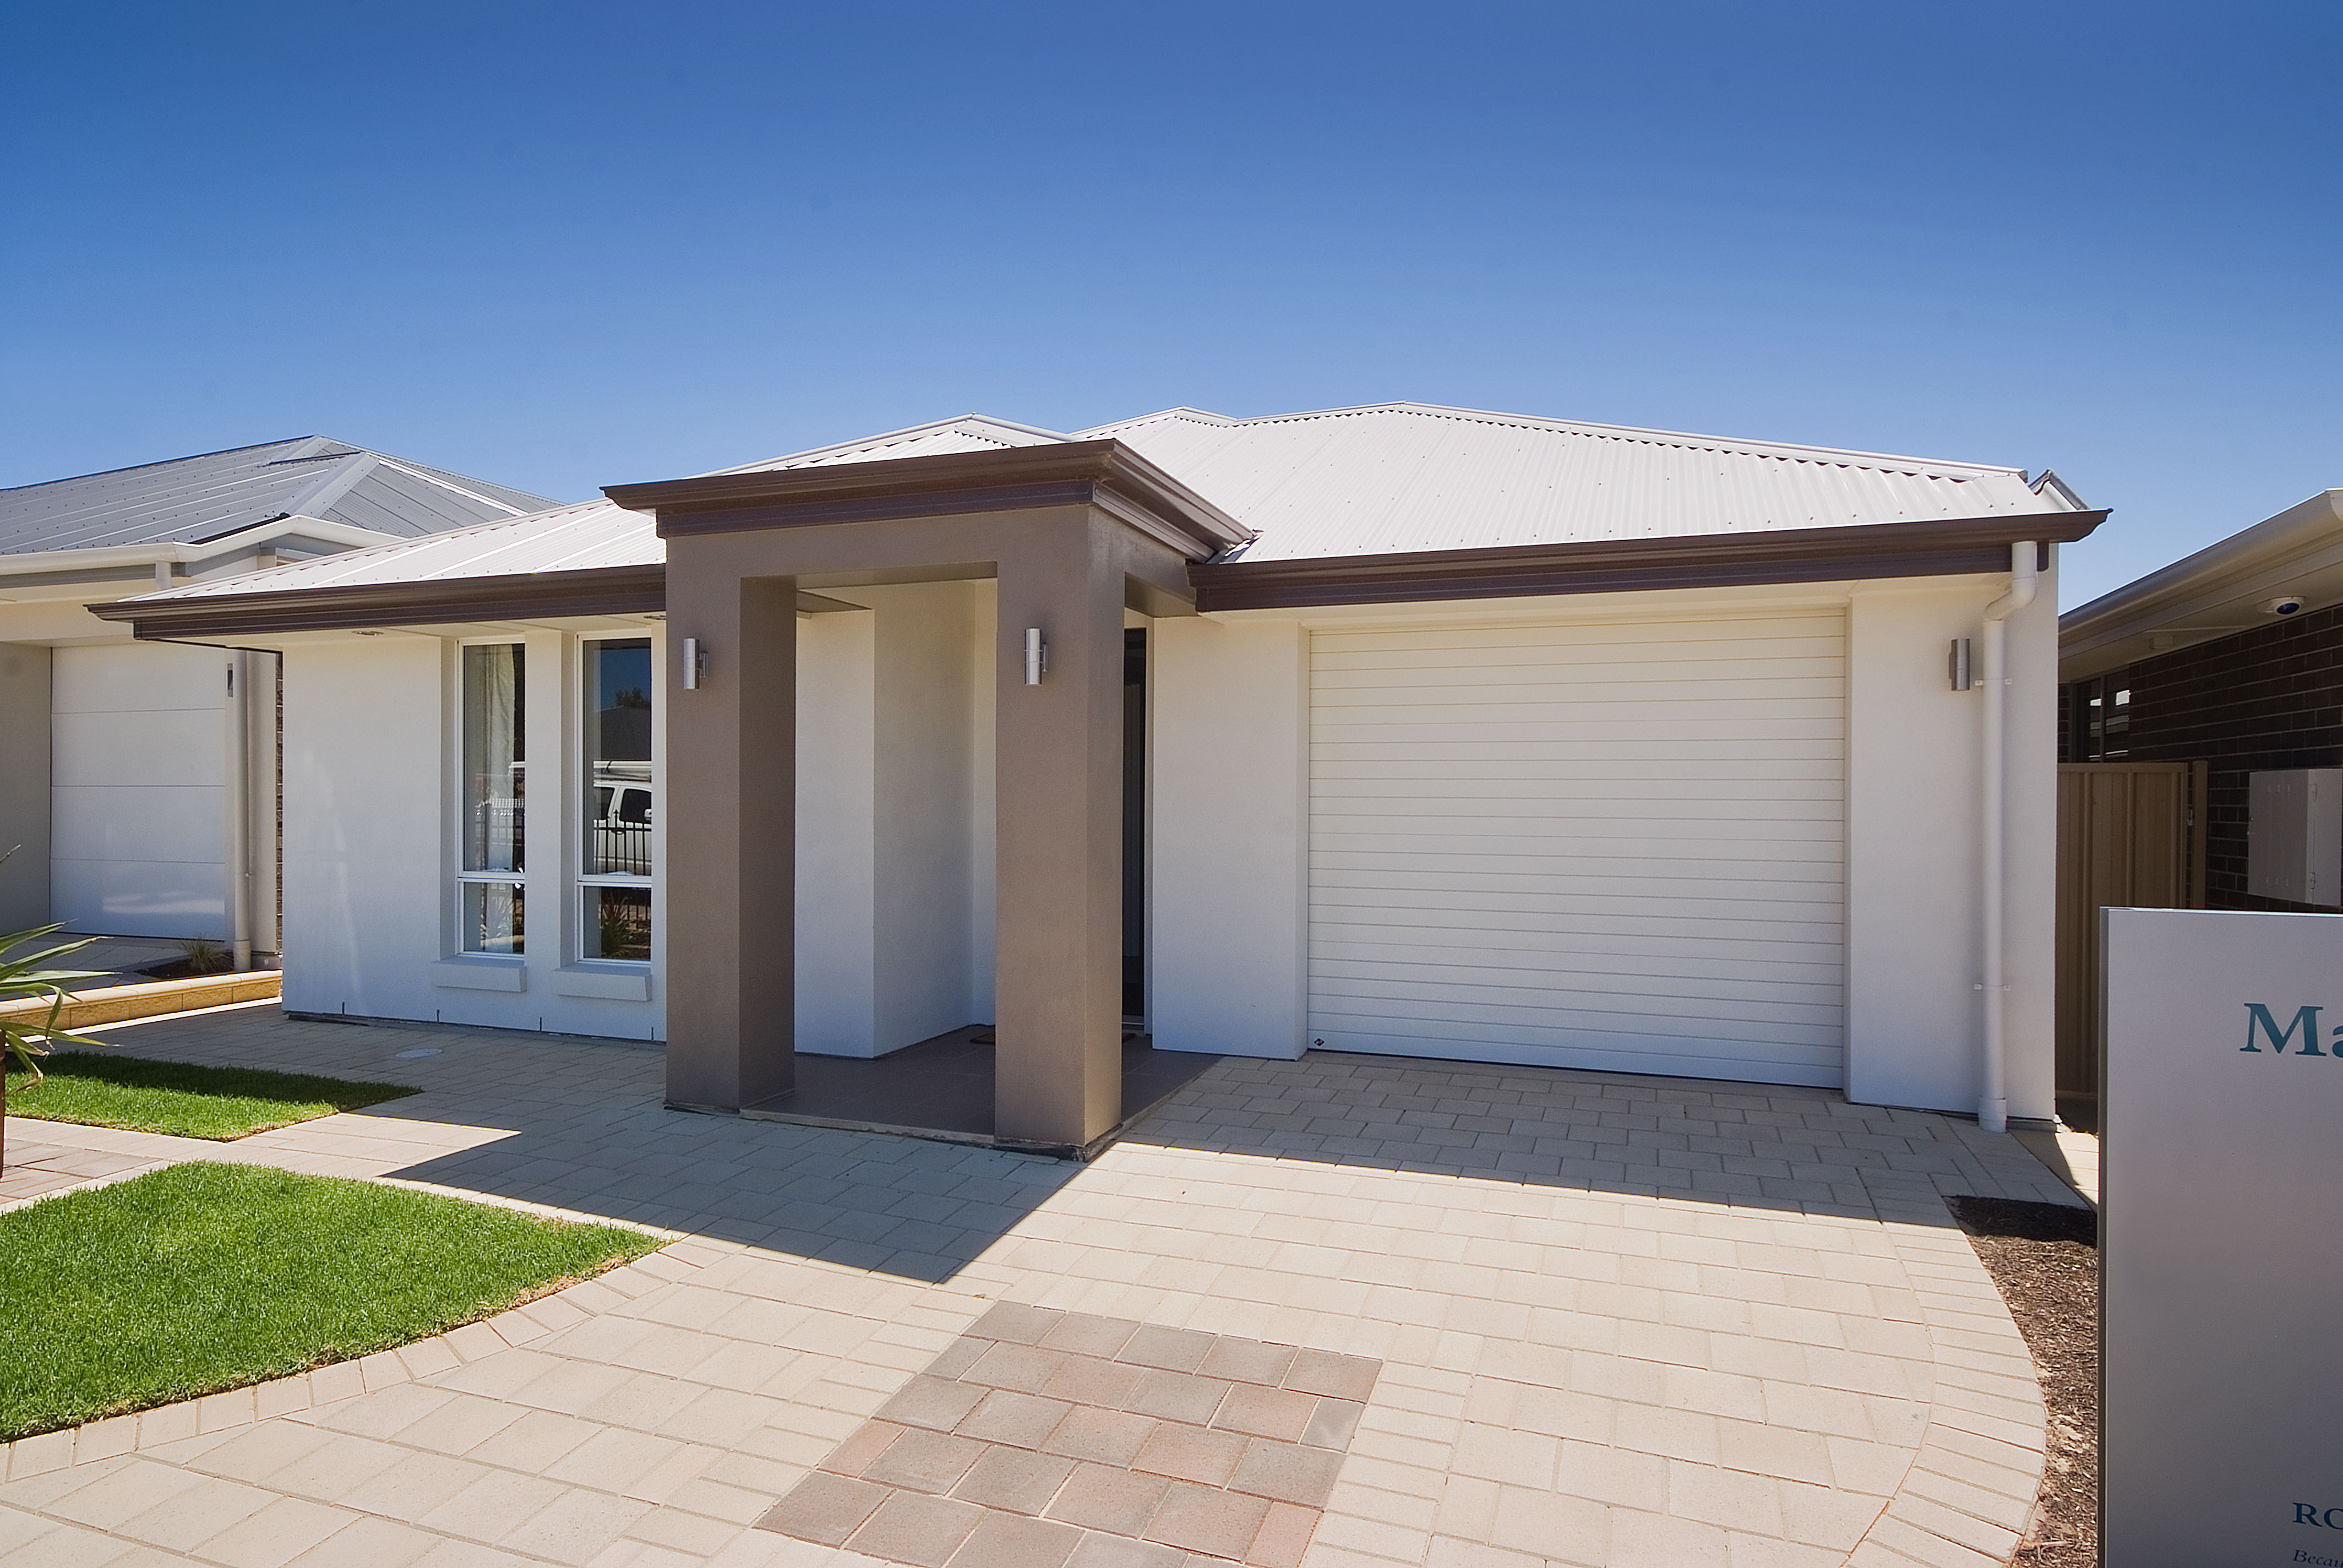 Marden Rossdale Homes Rossdale Homes Adelaide South